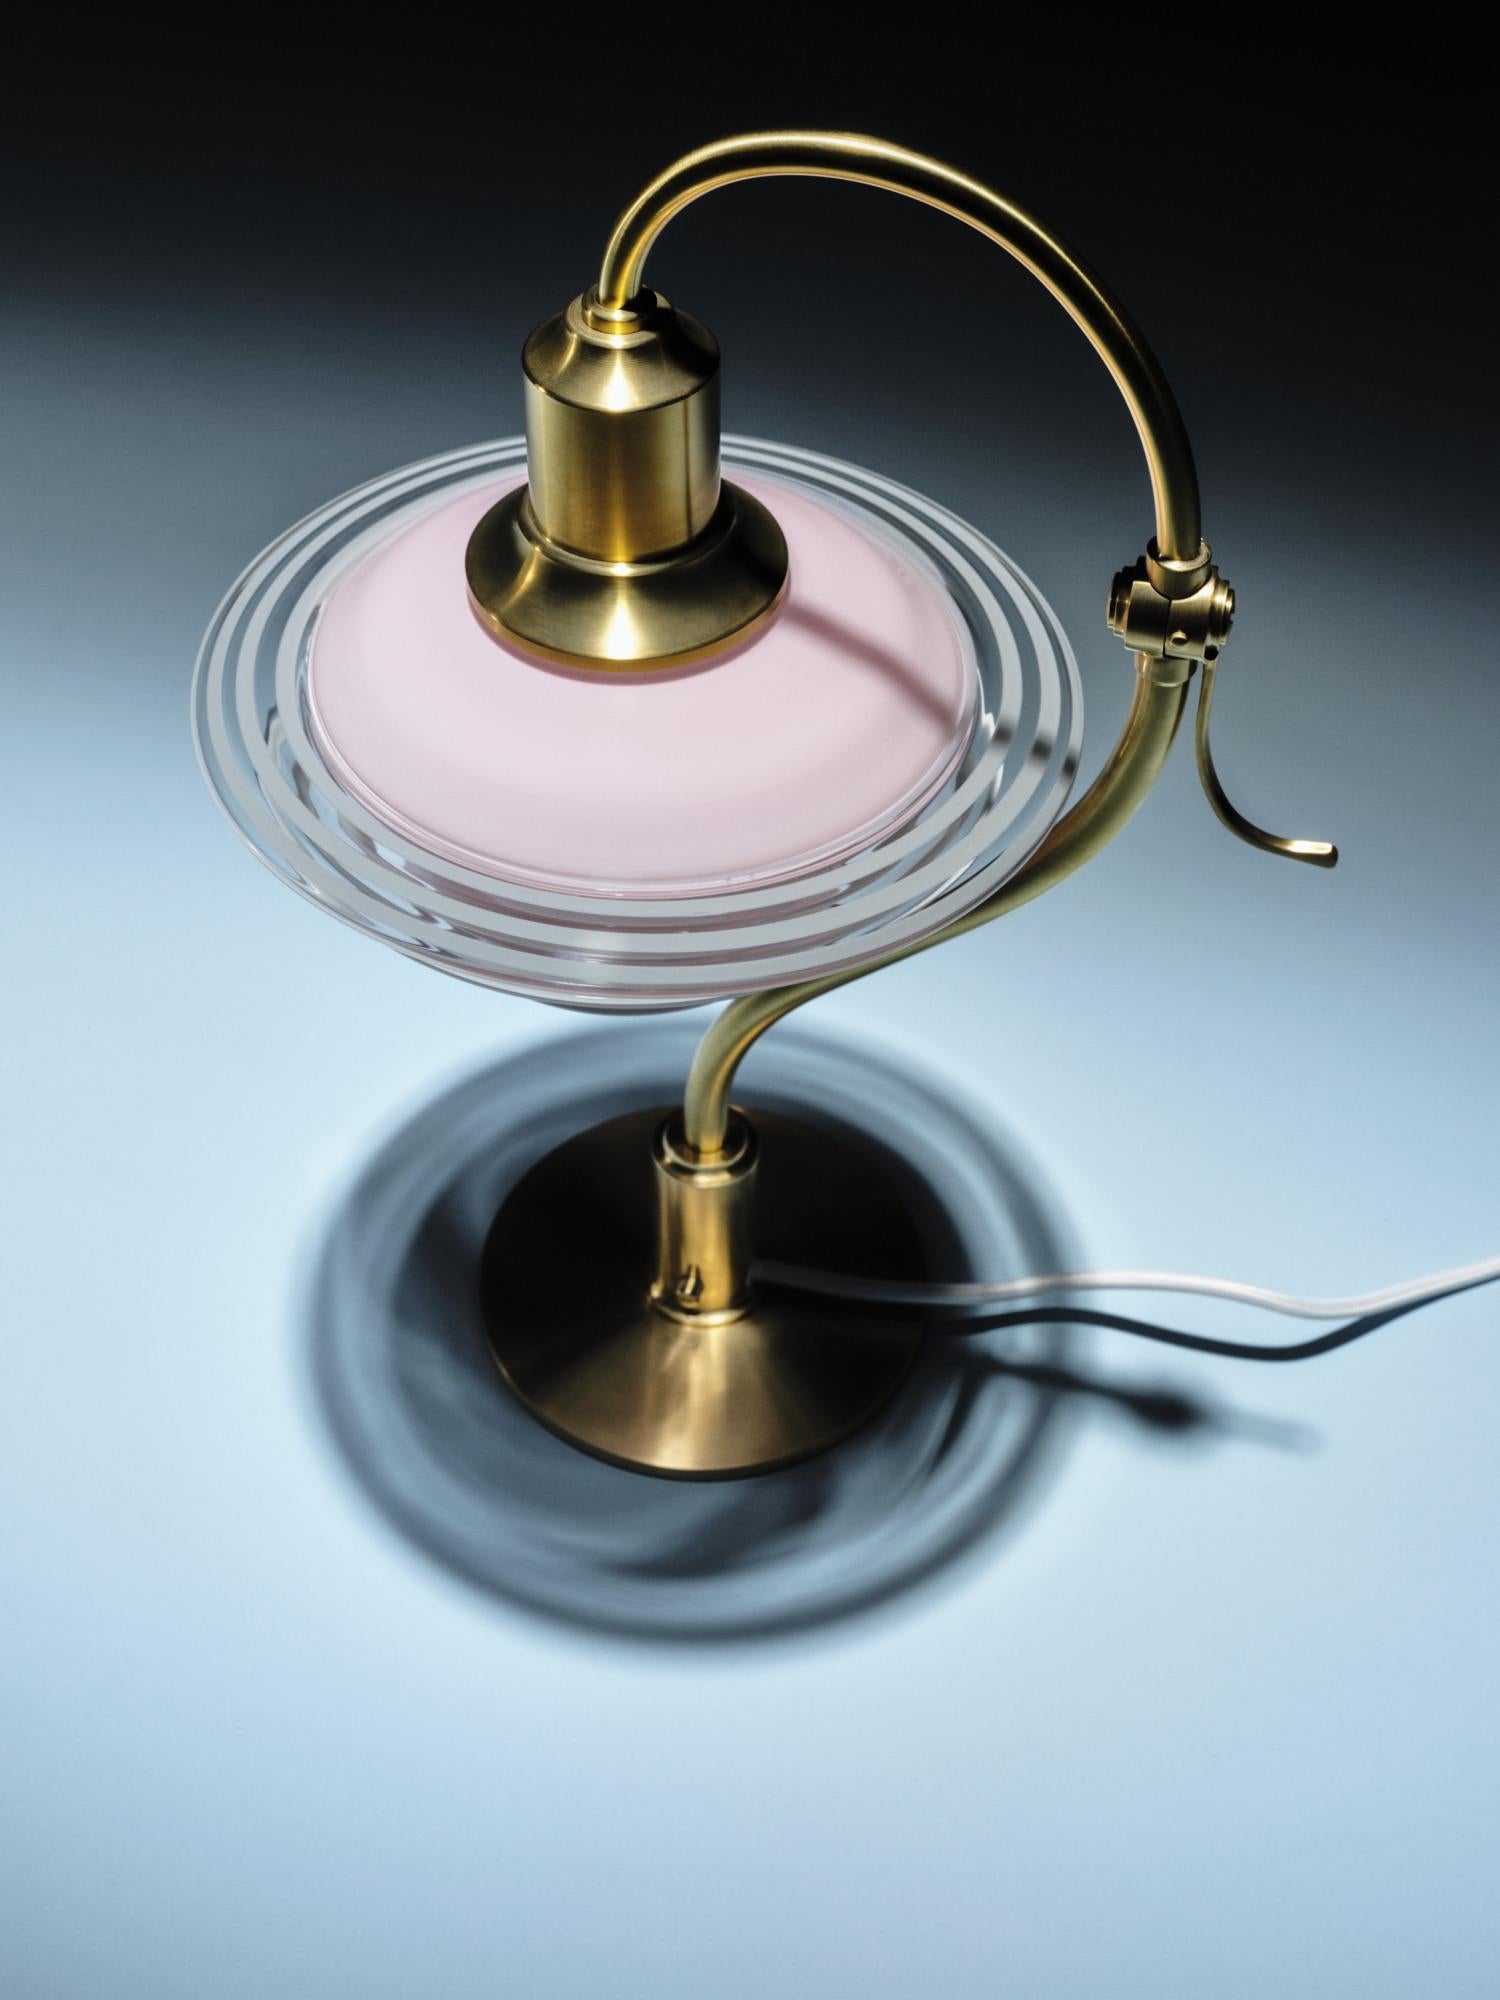 Saturn was designed by New York based glassblowing duo Home in Heven for Louis Poulsen and exhibited at 3daysofdesign 2023 in Copenhagen, Denmark. 

